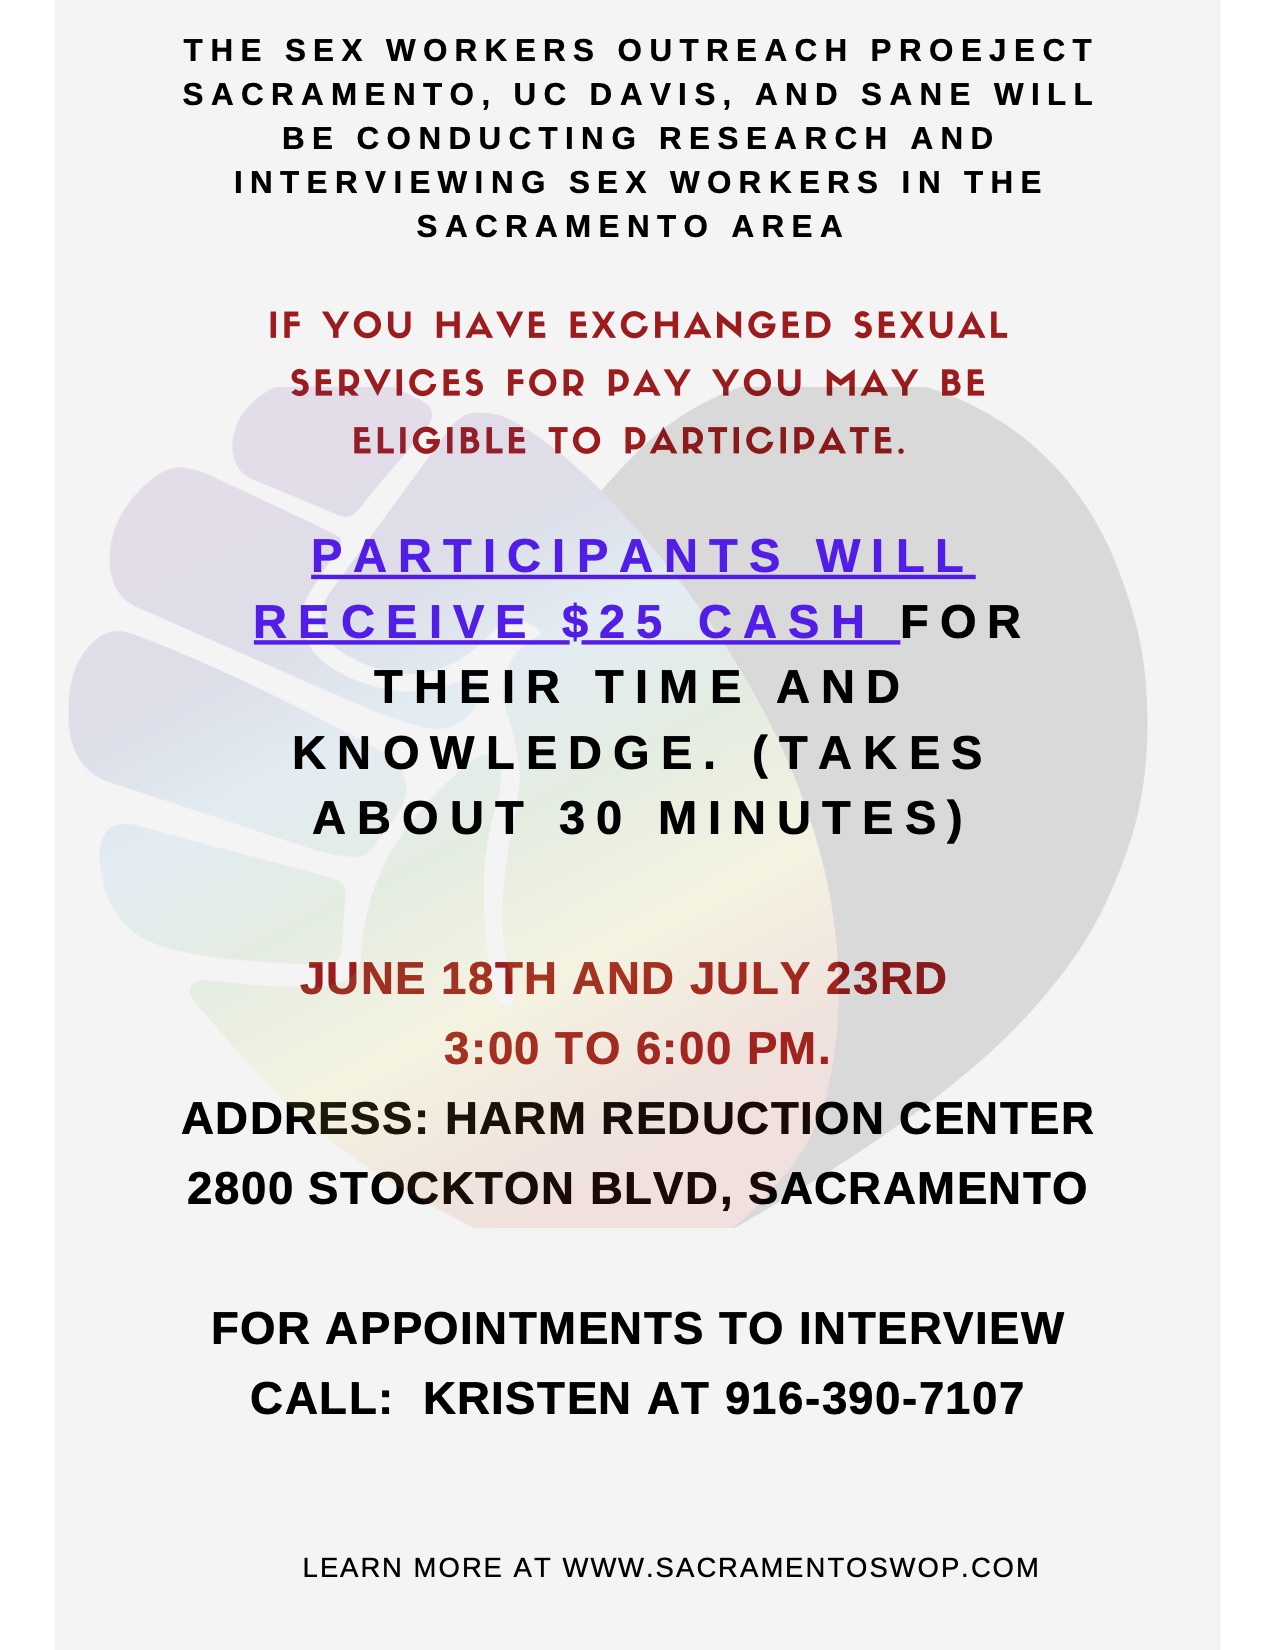 Information on Paid Interviews of Sex Workers